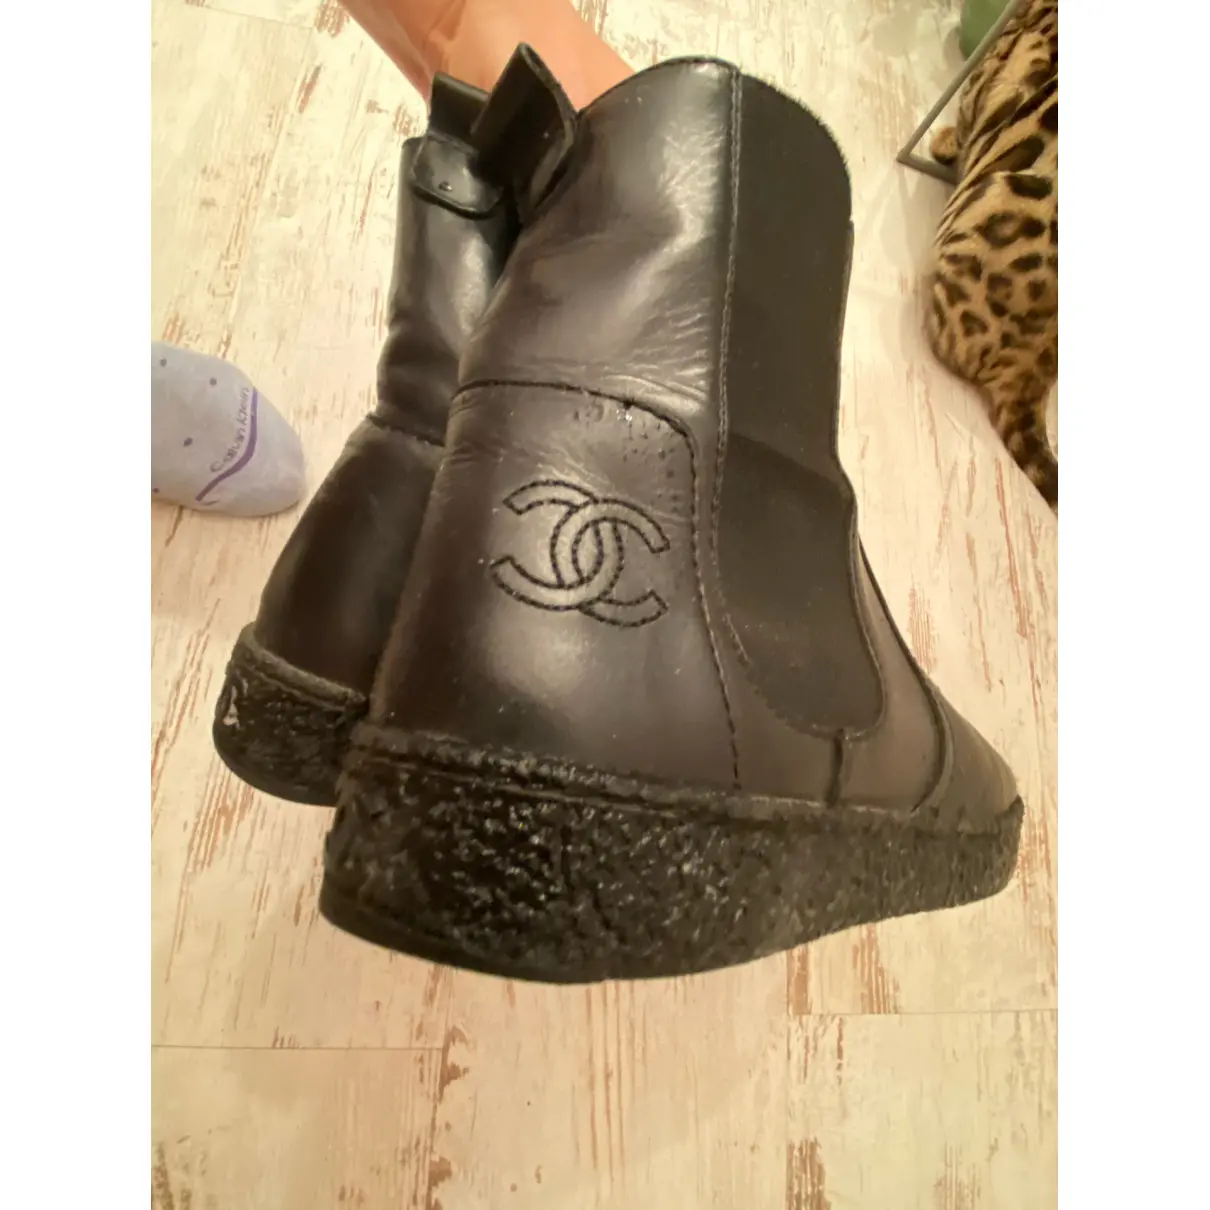 Buy Chanel Leather ankle boots online